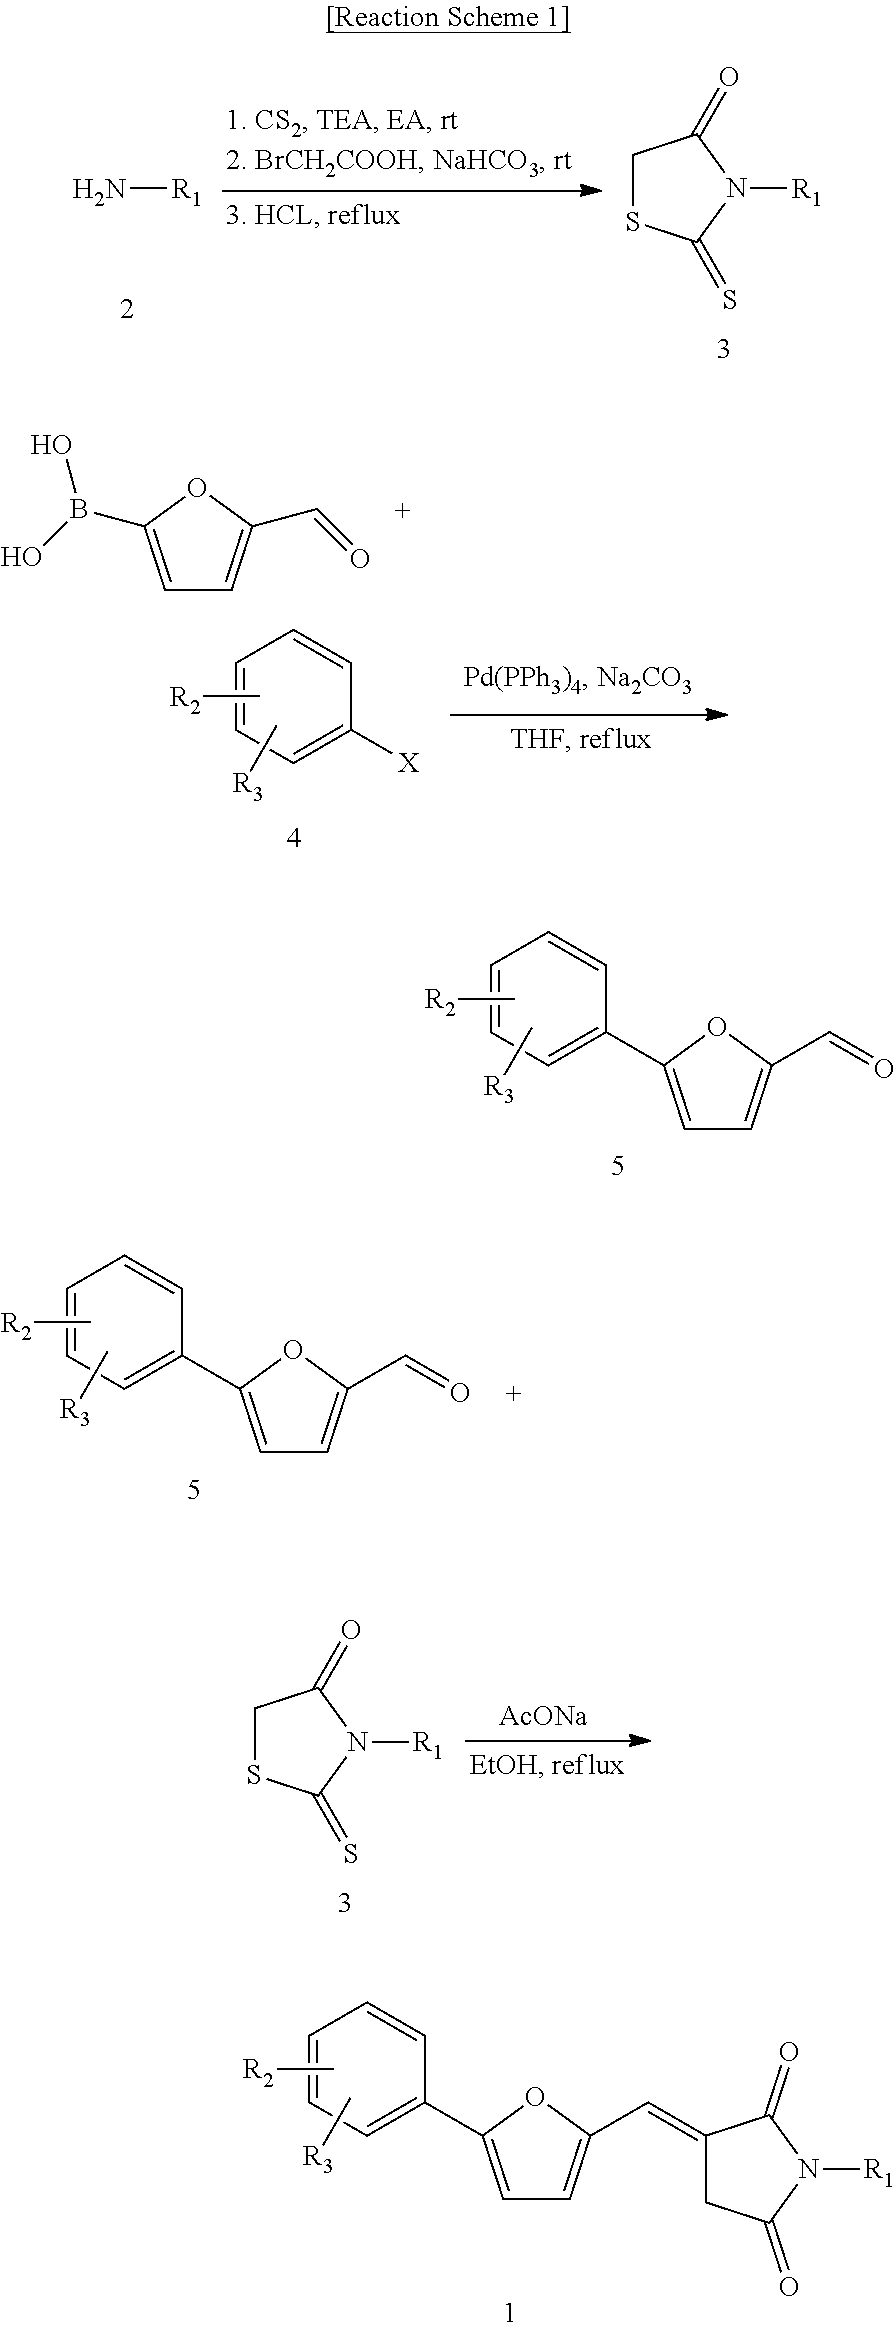 Rhodanine derivatives, method for preparing same, and pharmaceutical composition for the prevention or treatment of aids containing the rhodanine derivatives as active ingredients